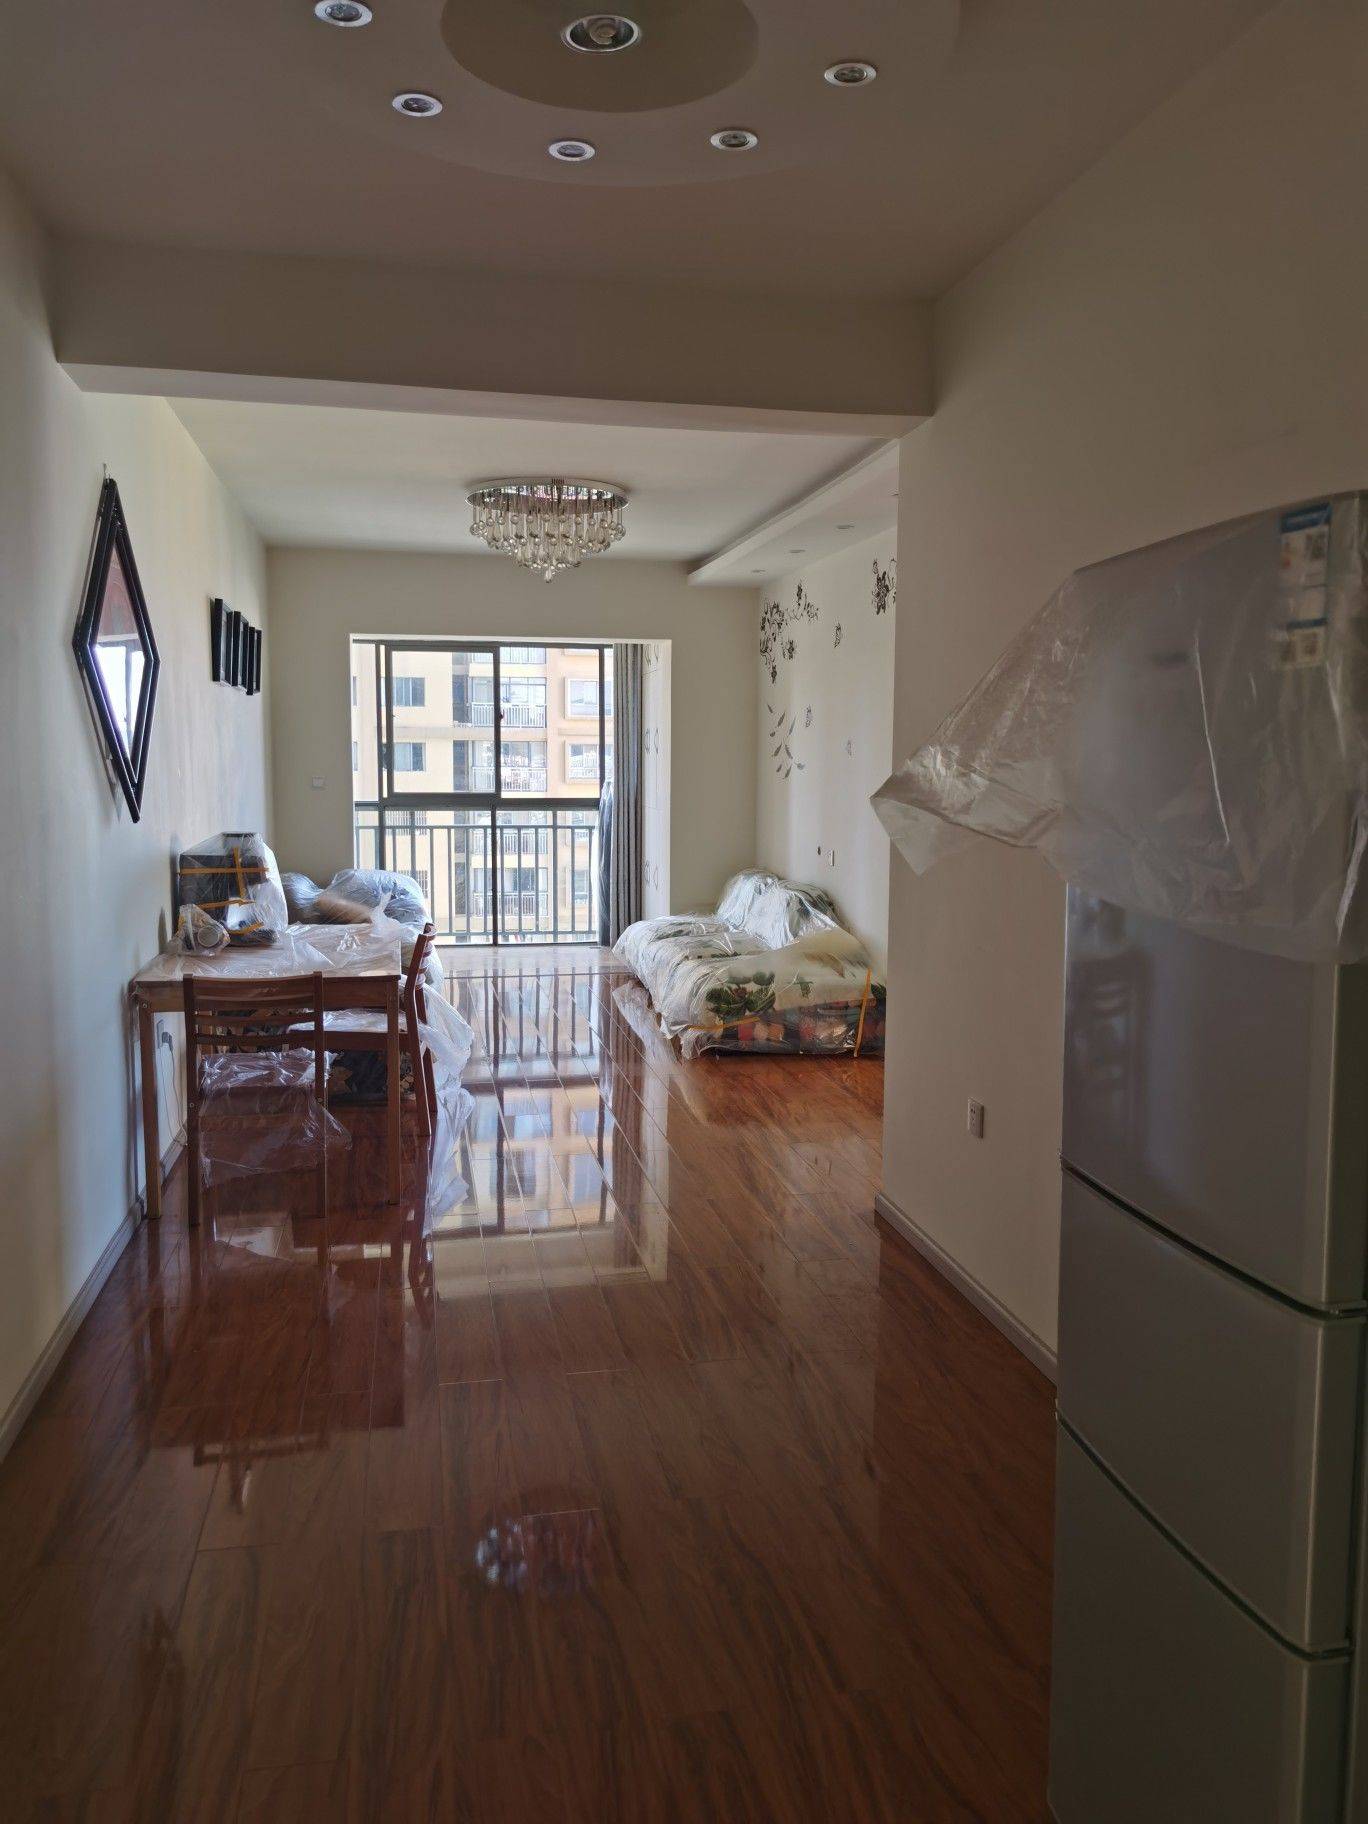 Kunming-Panlong-Cozy Home,Clean&Comfy,No Gender Limit,Chilled